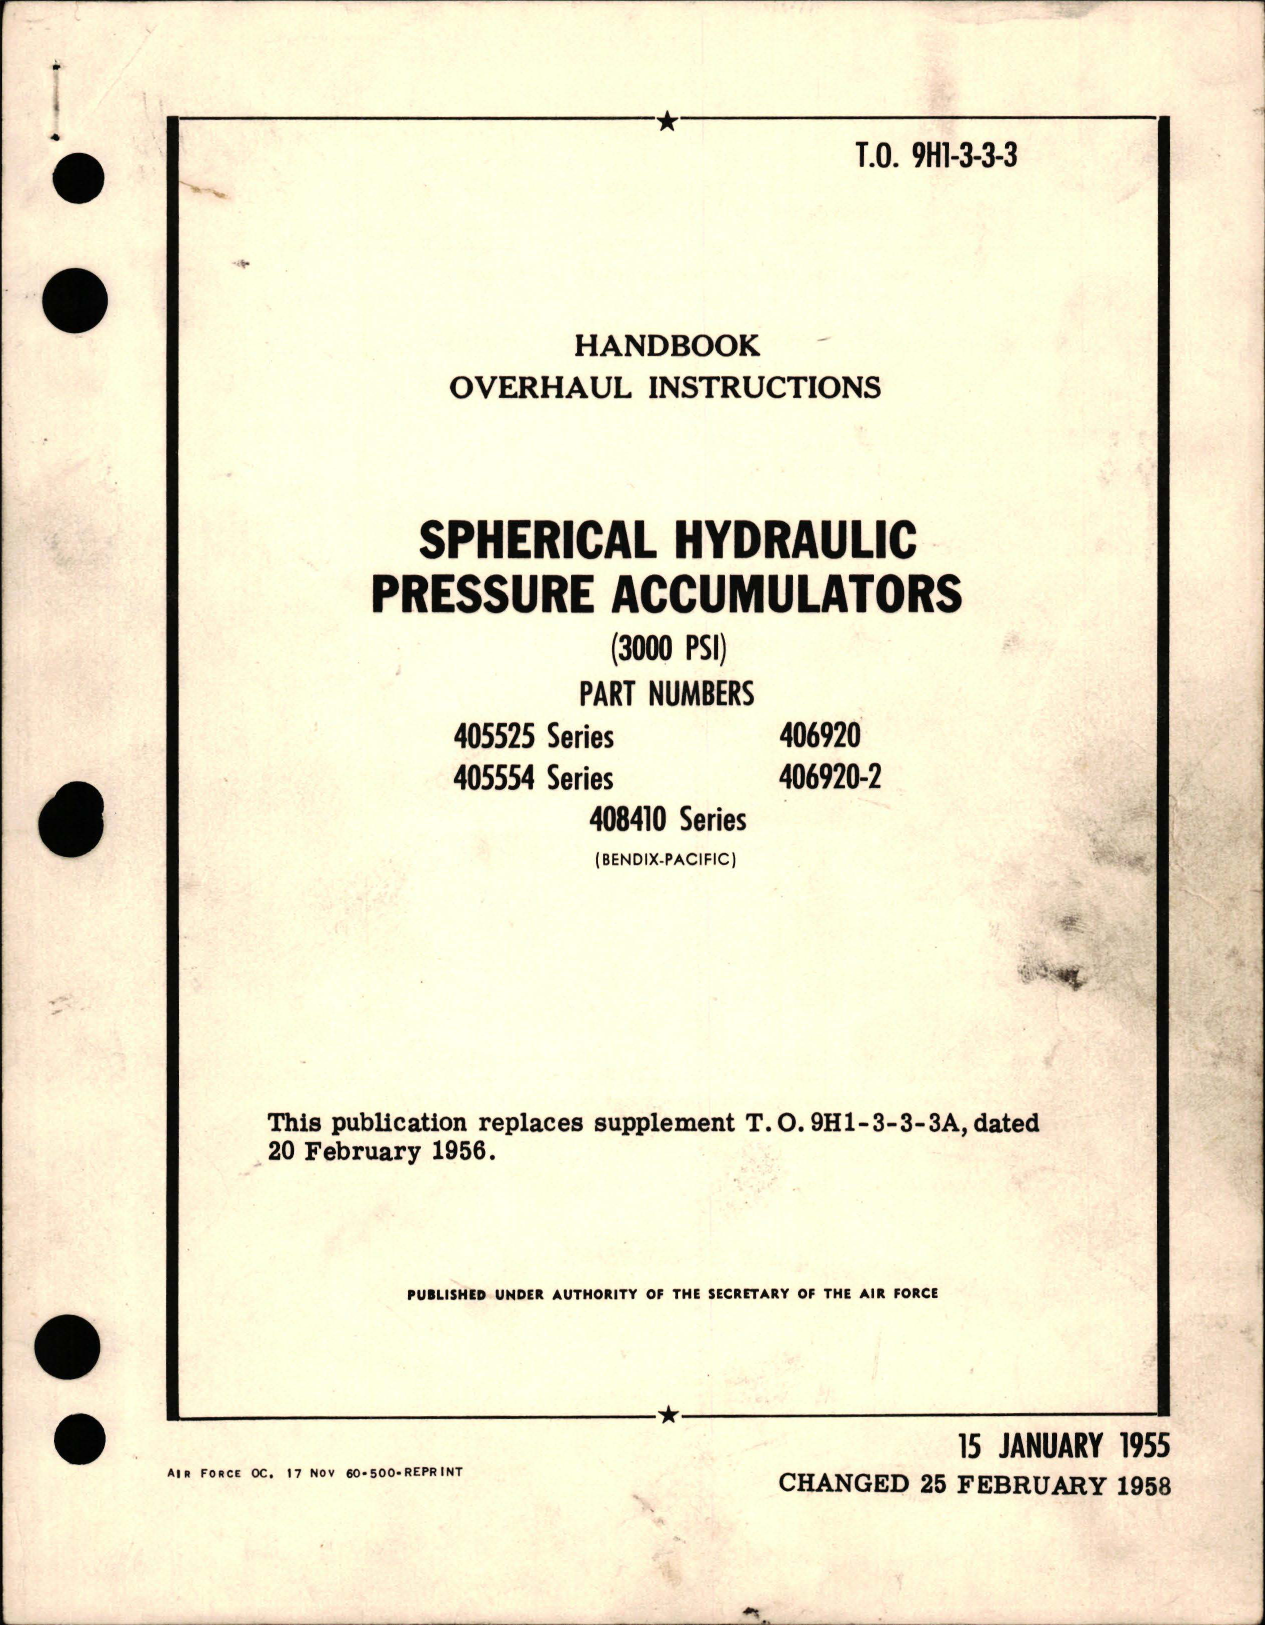 Sample page 1 from AirCorps Library document: Overhaul Instructions for Spherical Hydraulic Pressure Accumulators - 3000 PSI - Parts 405525, 405554, 406920, 406920-2, 408410